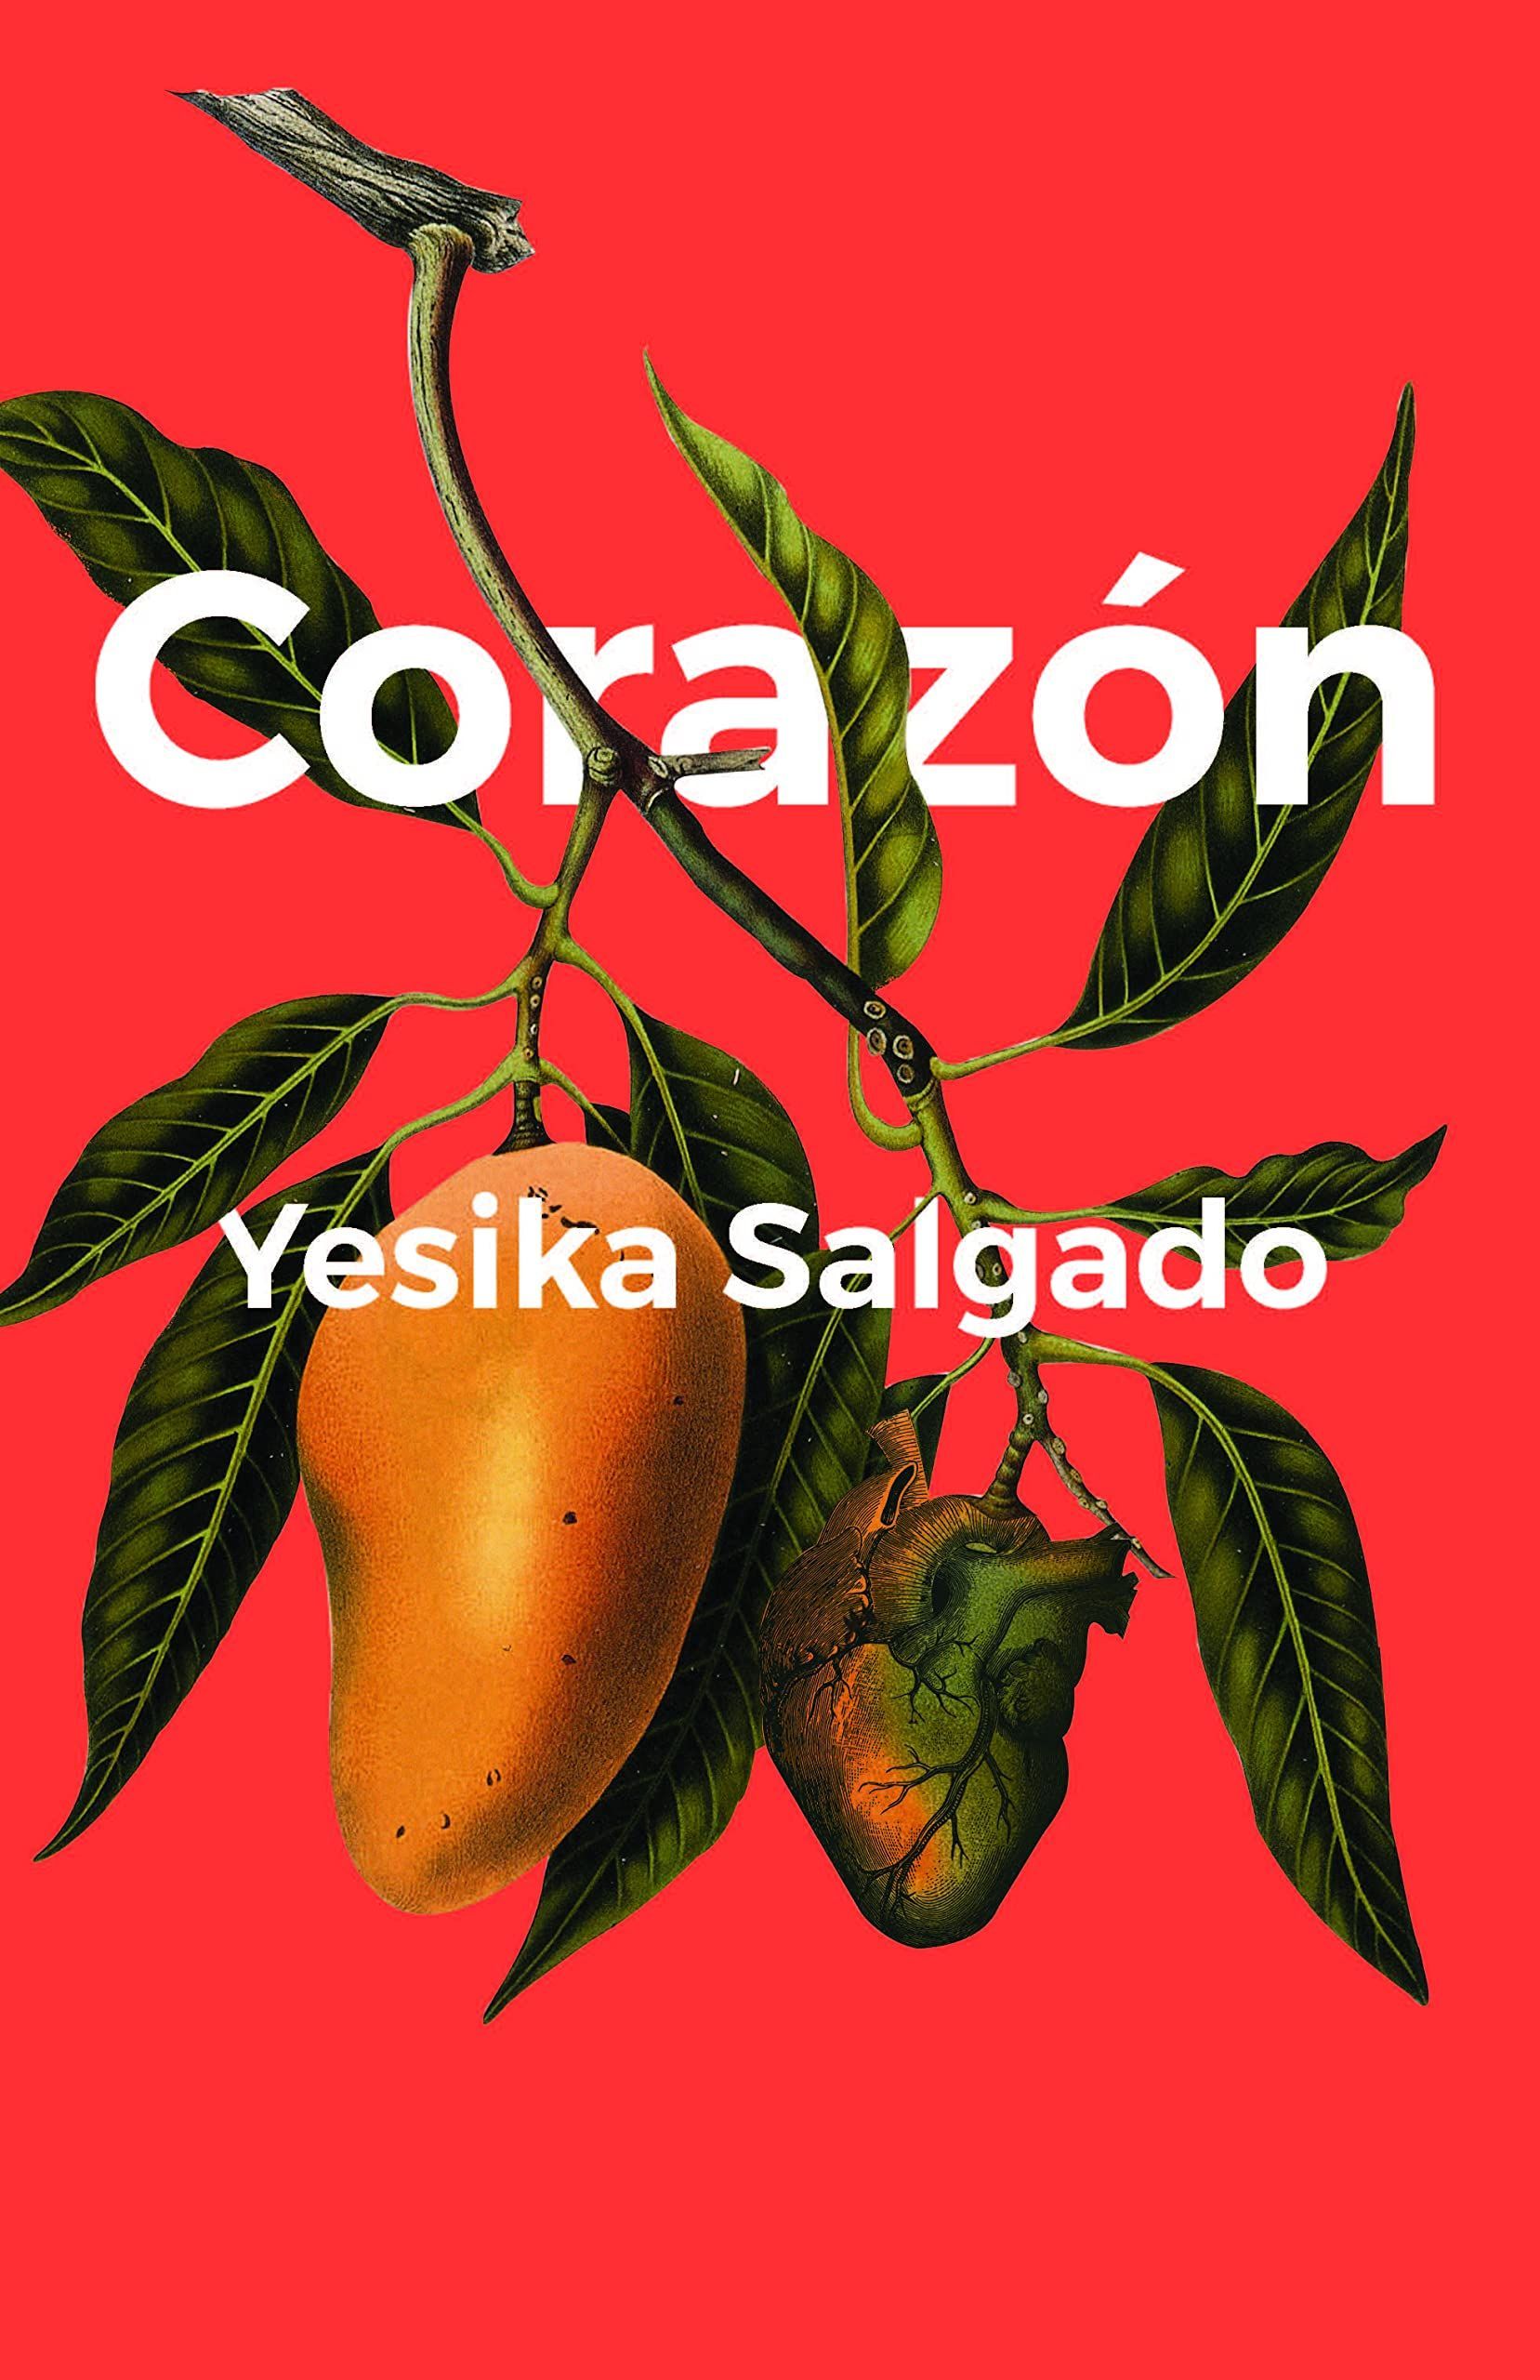 I’ve Always Stood in My Truth: A Conversation with Yesika Salgado